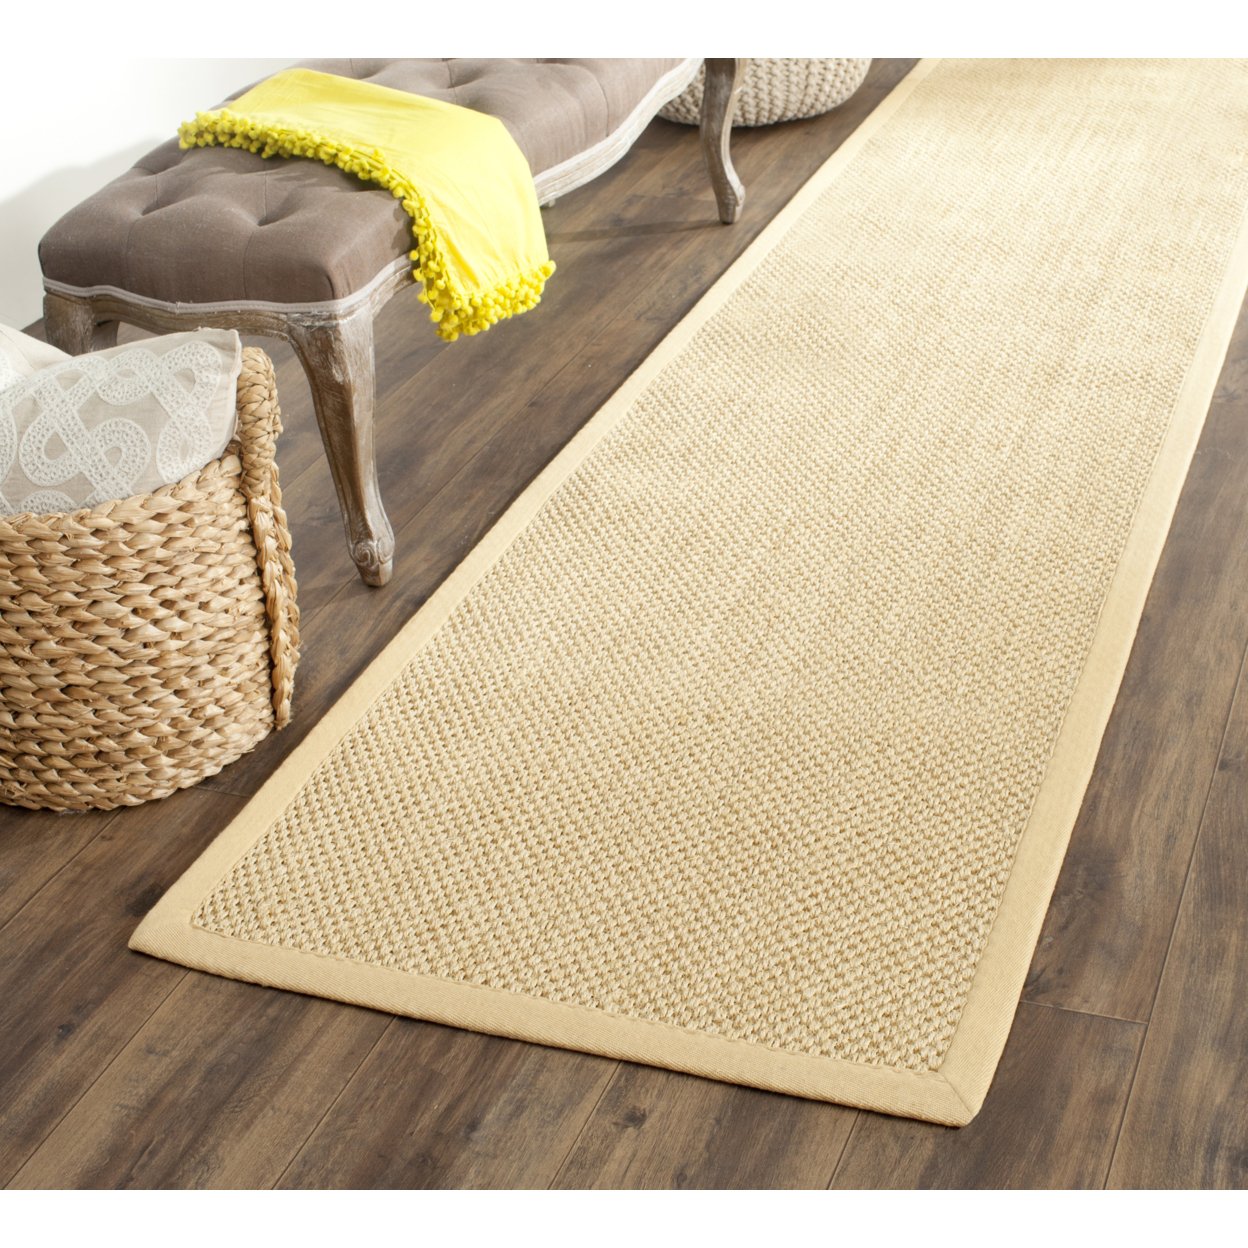 SAFAVIEH Natural Fiber Collection NF443A Maize/Wheat Rug - 7' Square